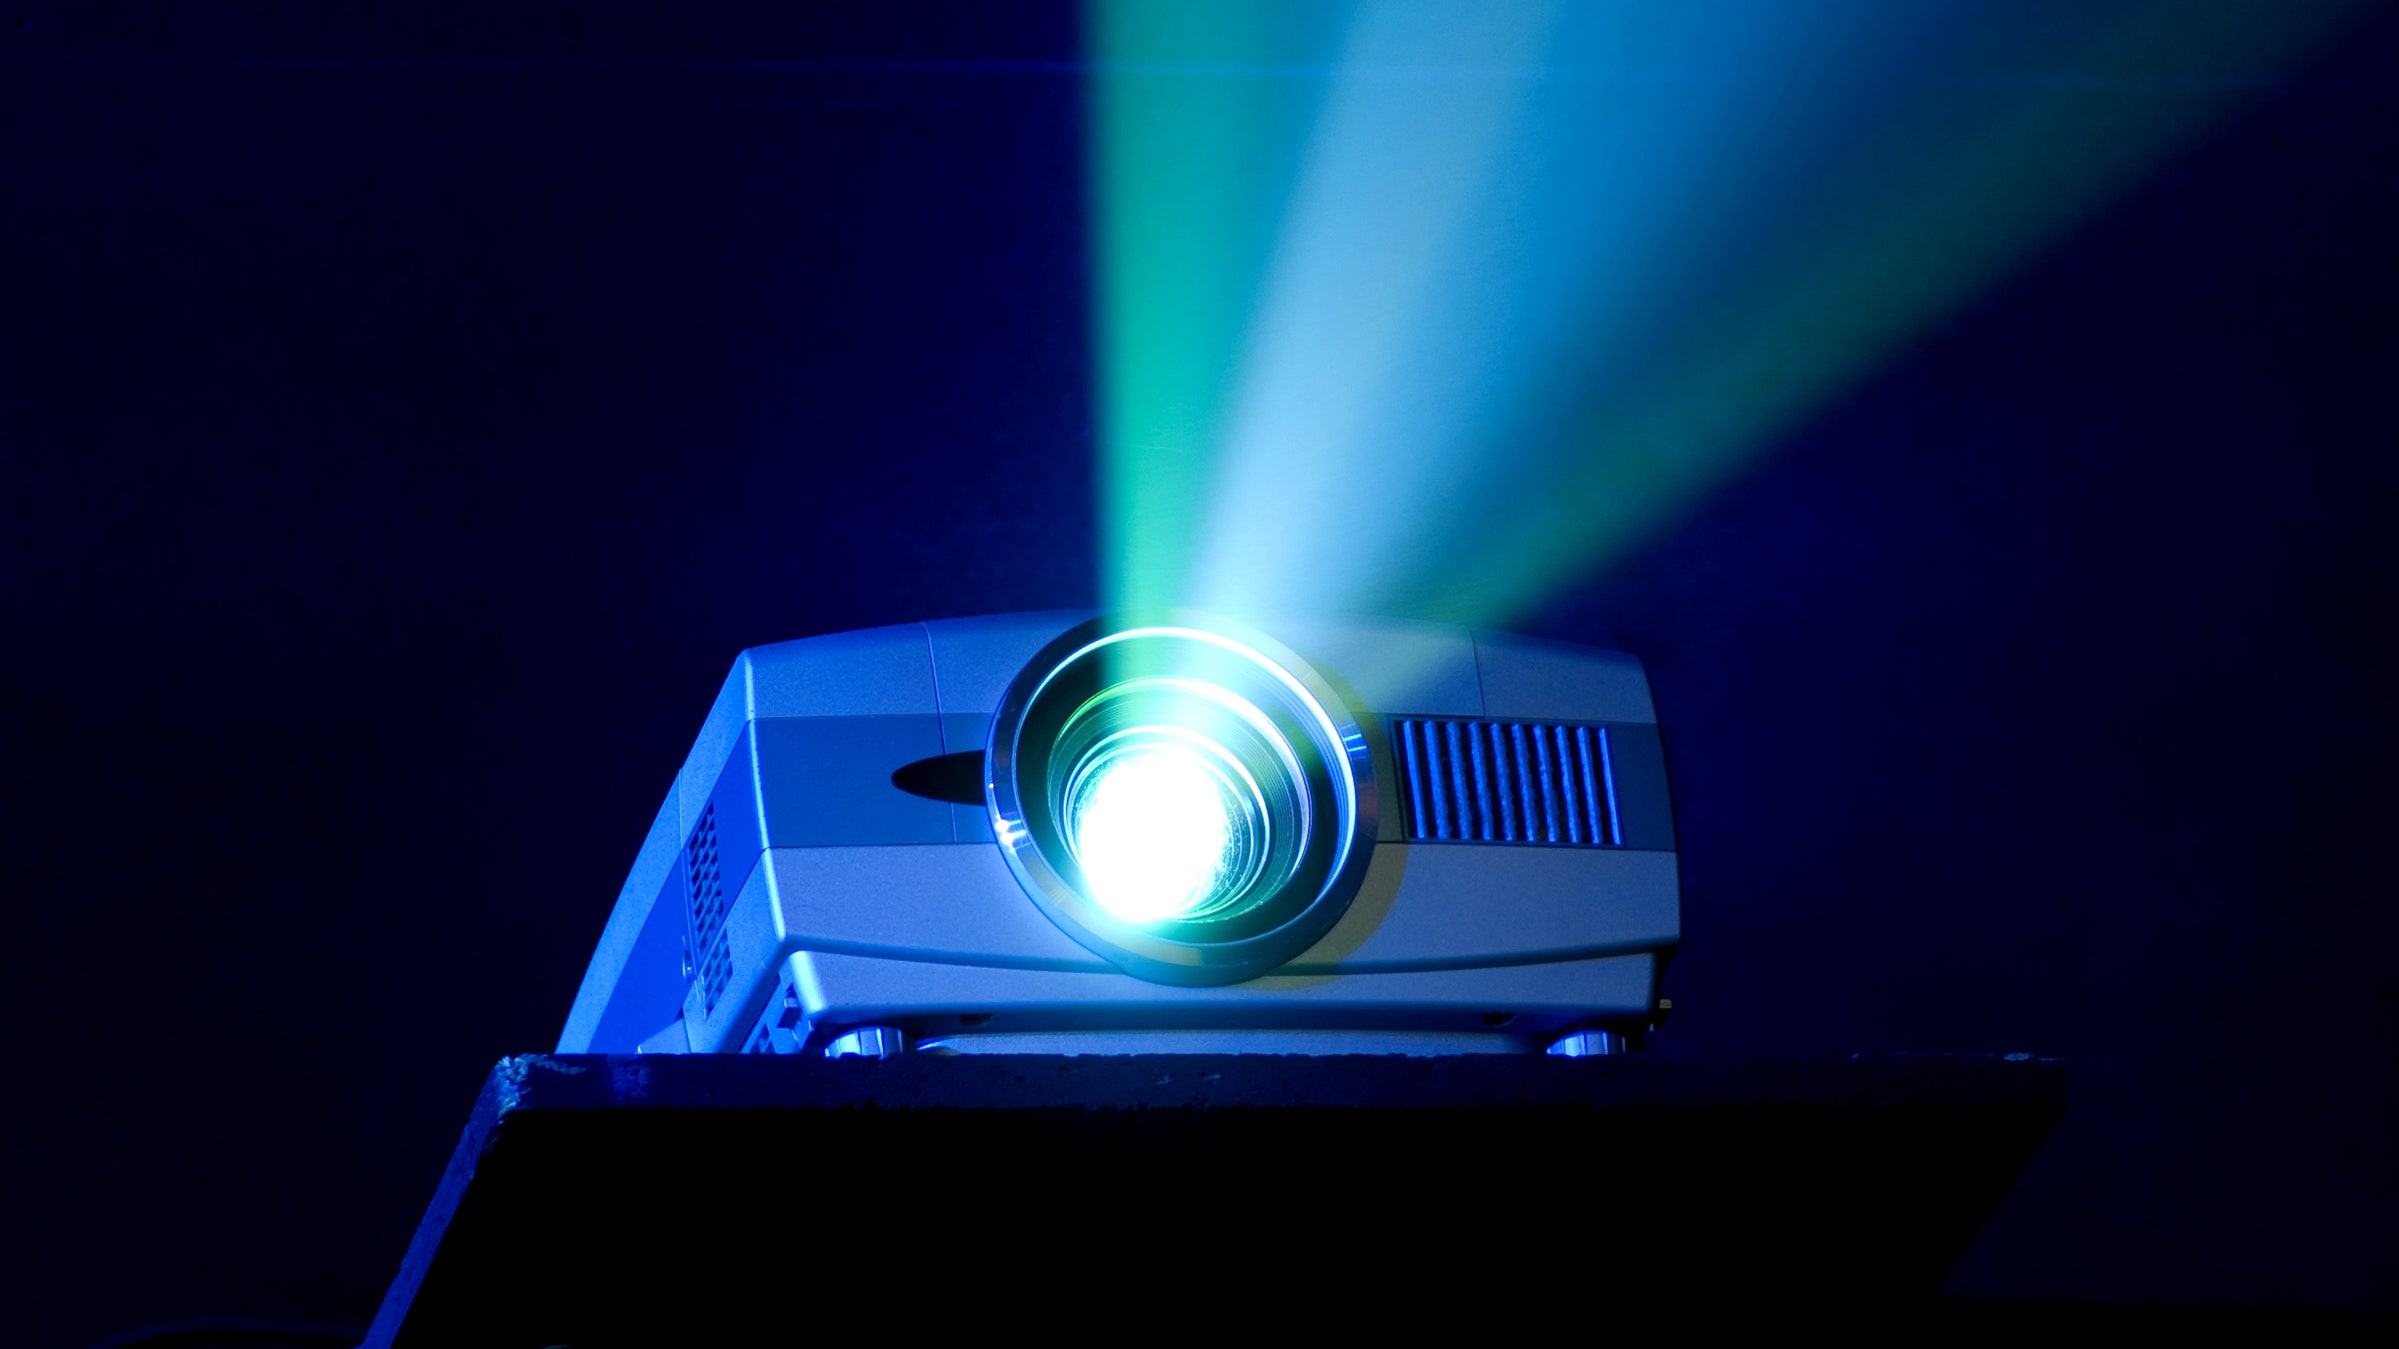 How Does A Projector Work?